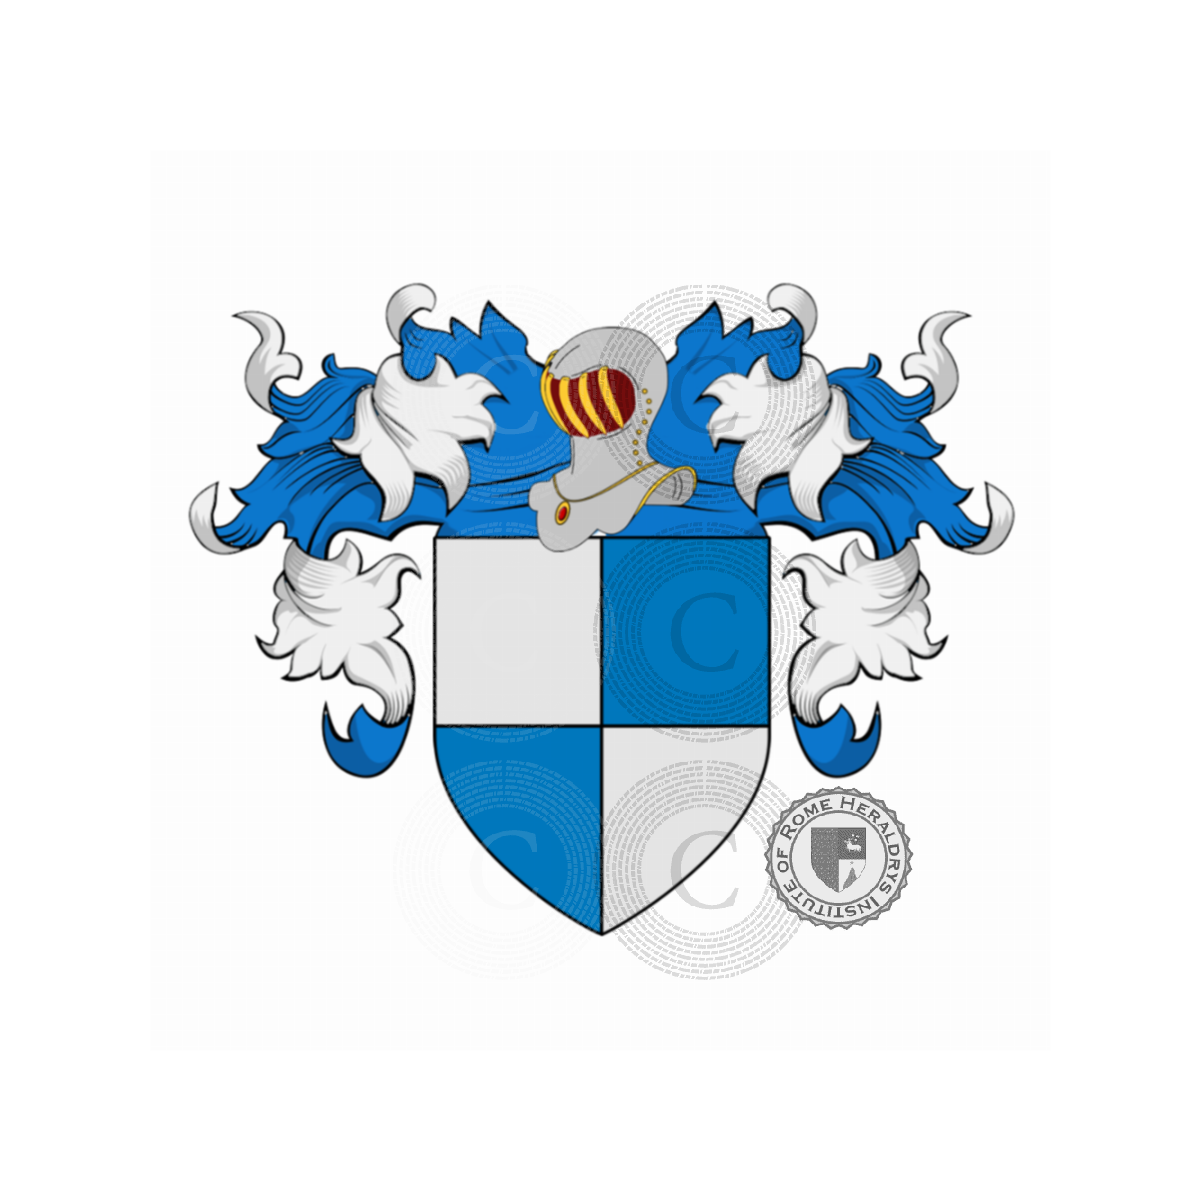 Coat of arms of familyScacchi